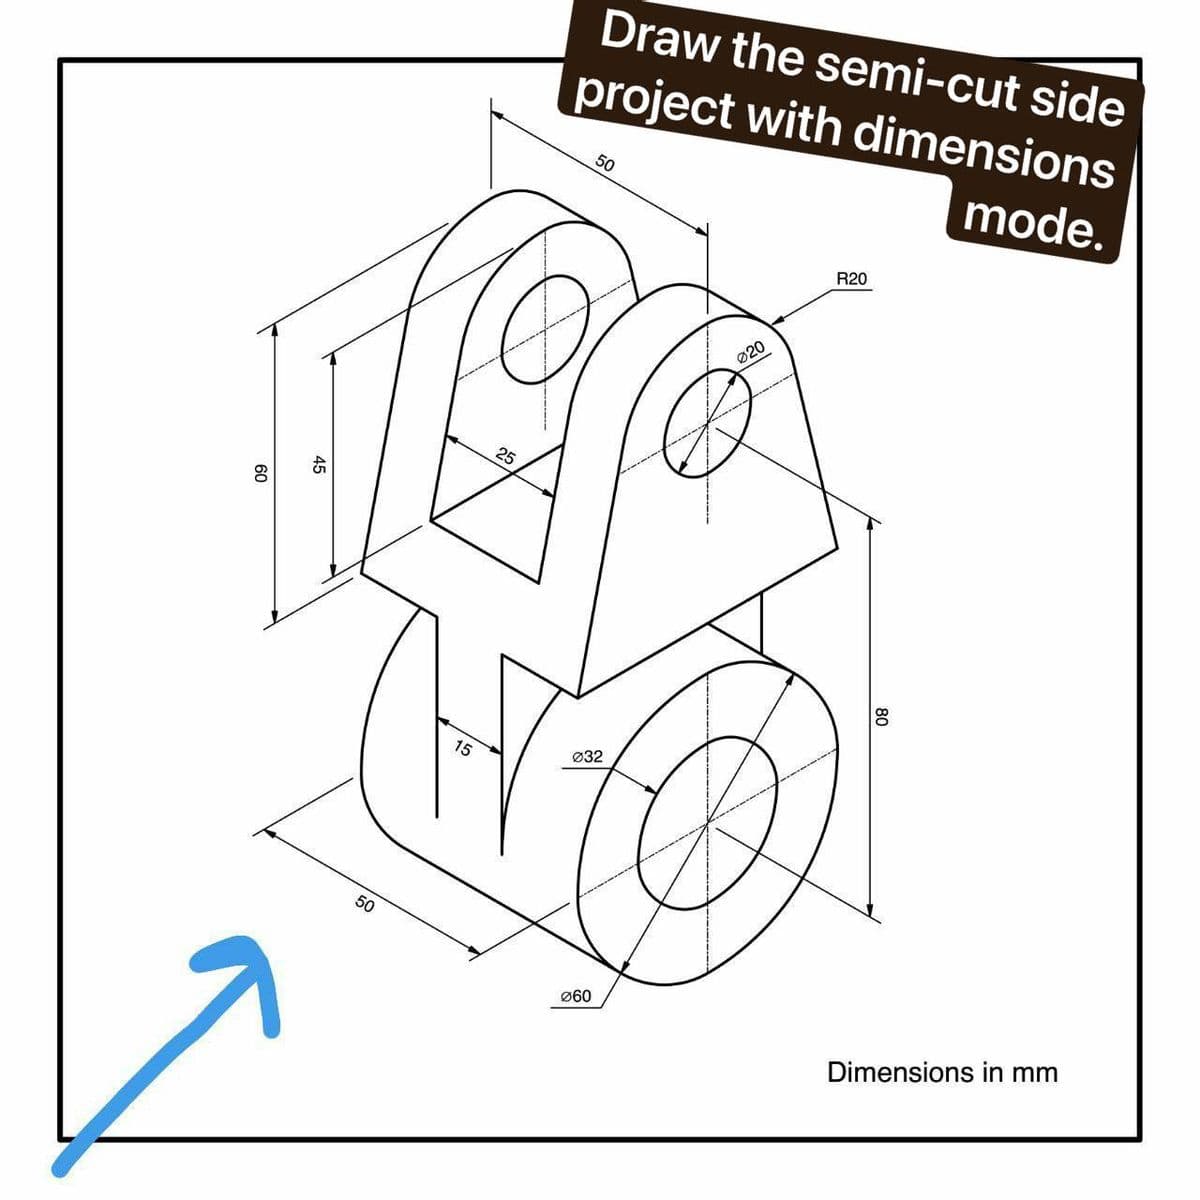 Draw the semi-cut side
project with dimensions
mode.
50
R20
Ø20
25
Ø32
15
50
Ø60
Dimensions in mm
80
45
60
